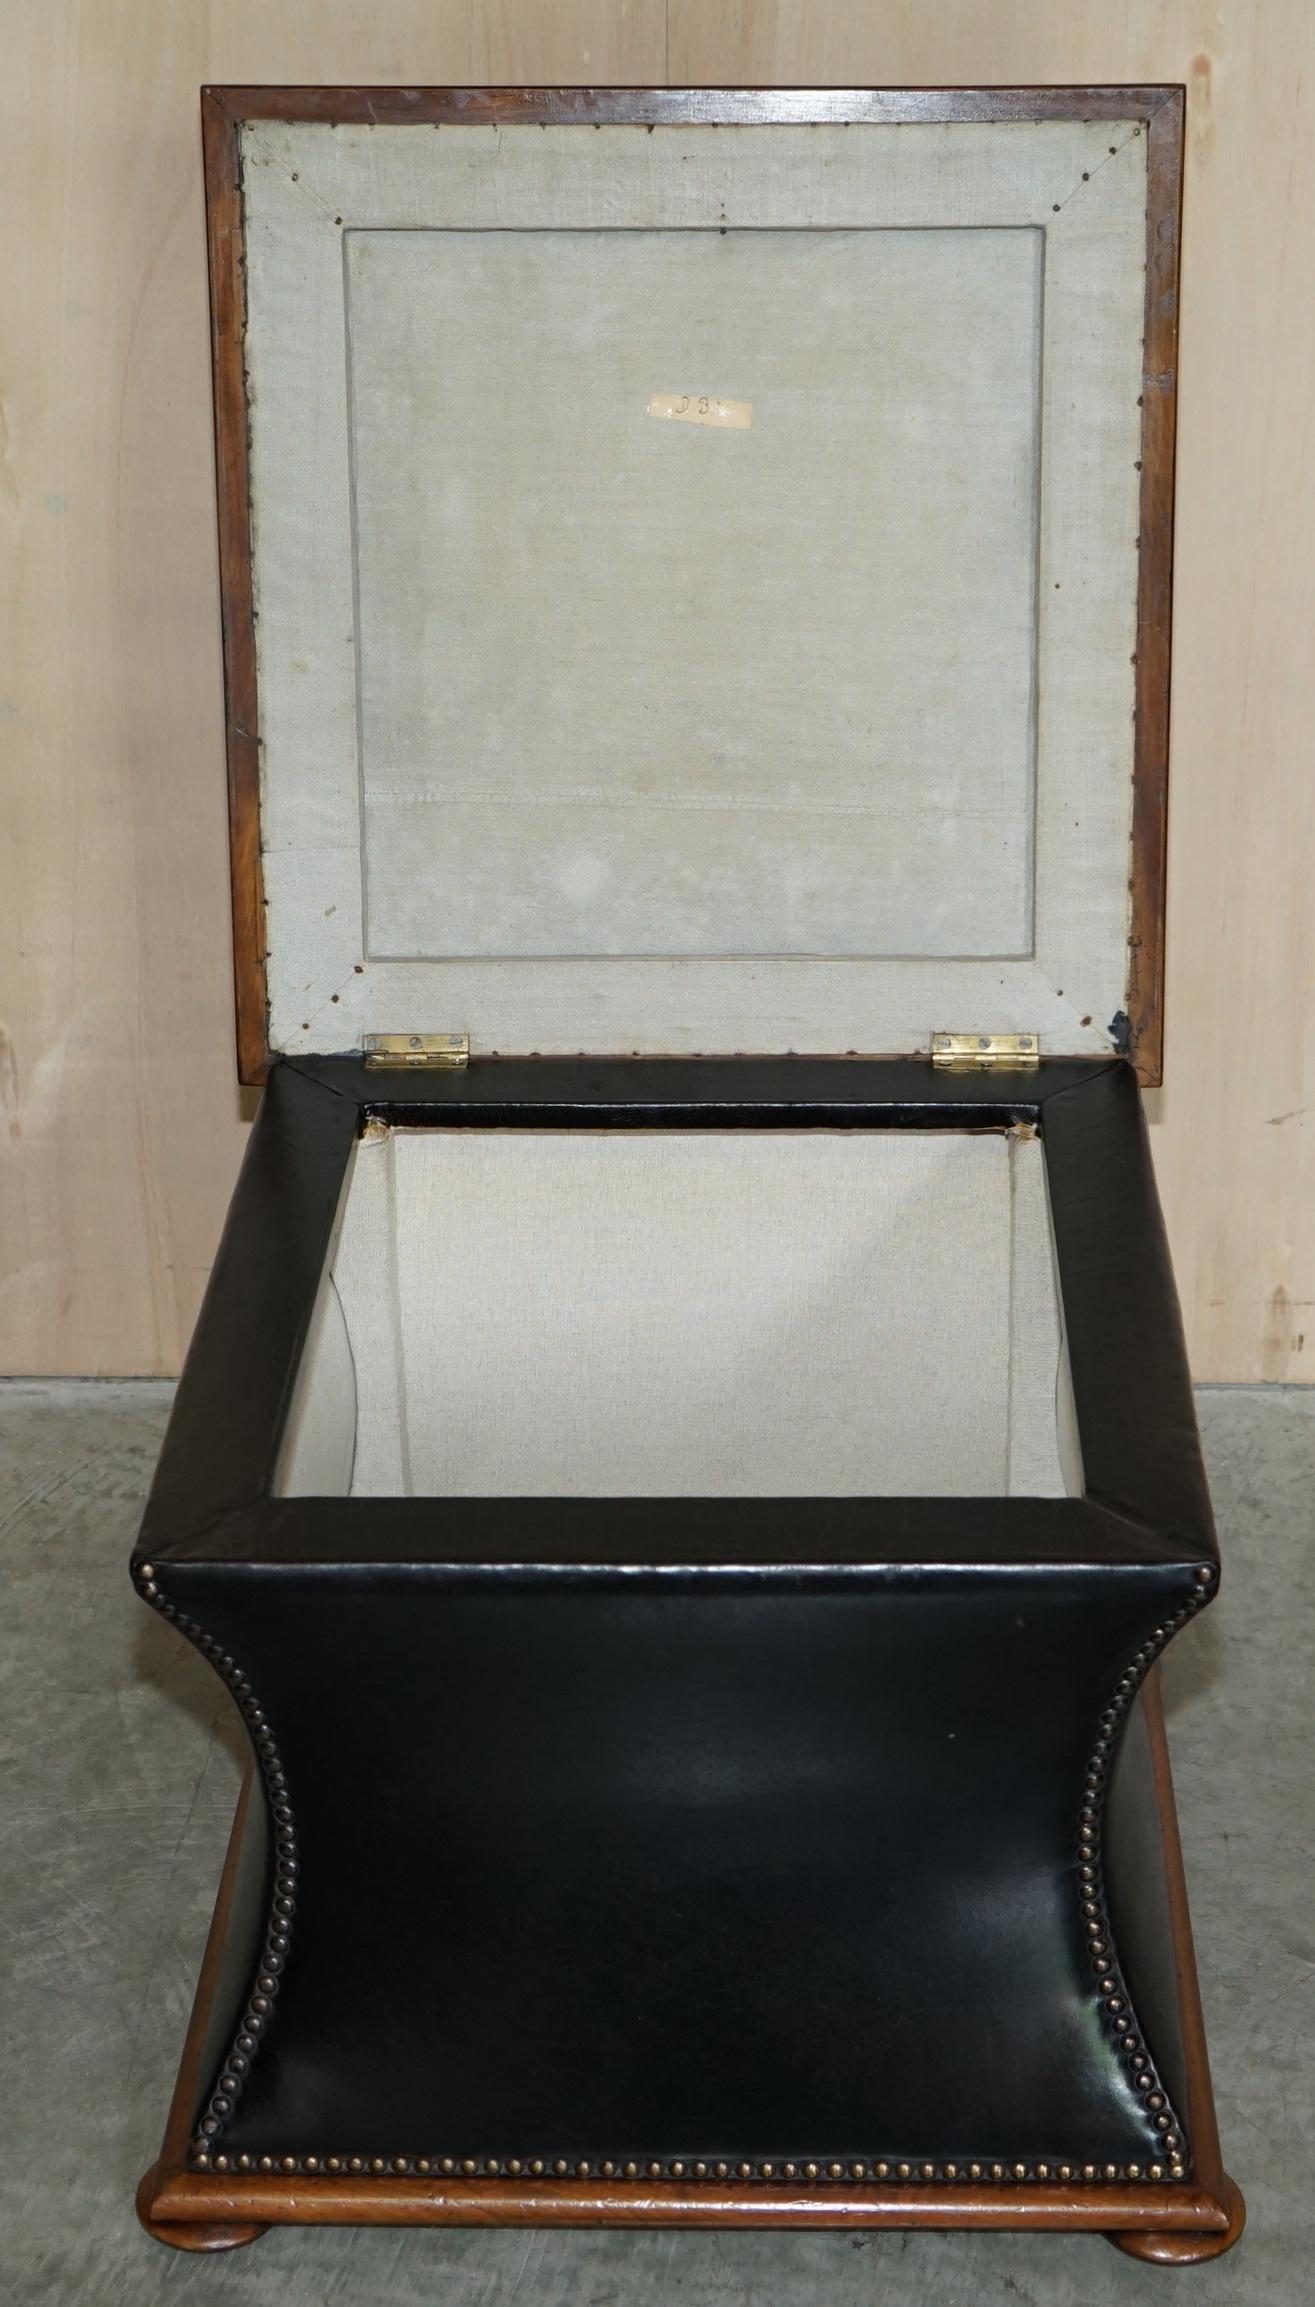 Mid-19th Century EXQUISITE VICTORIAN CiRCA 1860 TAN BLACK LEATHER OTTOMAN STOOL FOOTSTOOL STORAGE For Sale